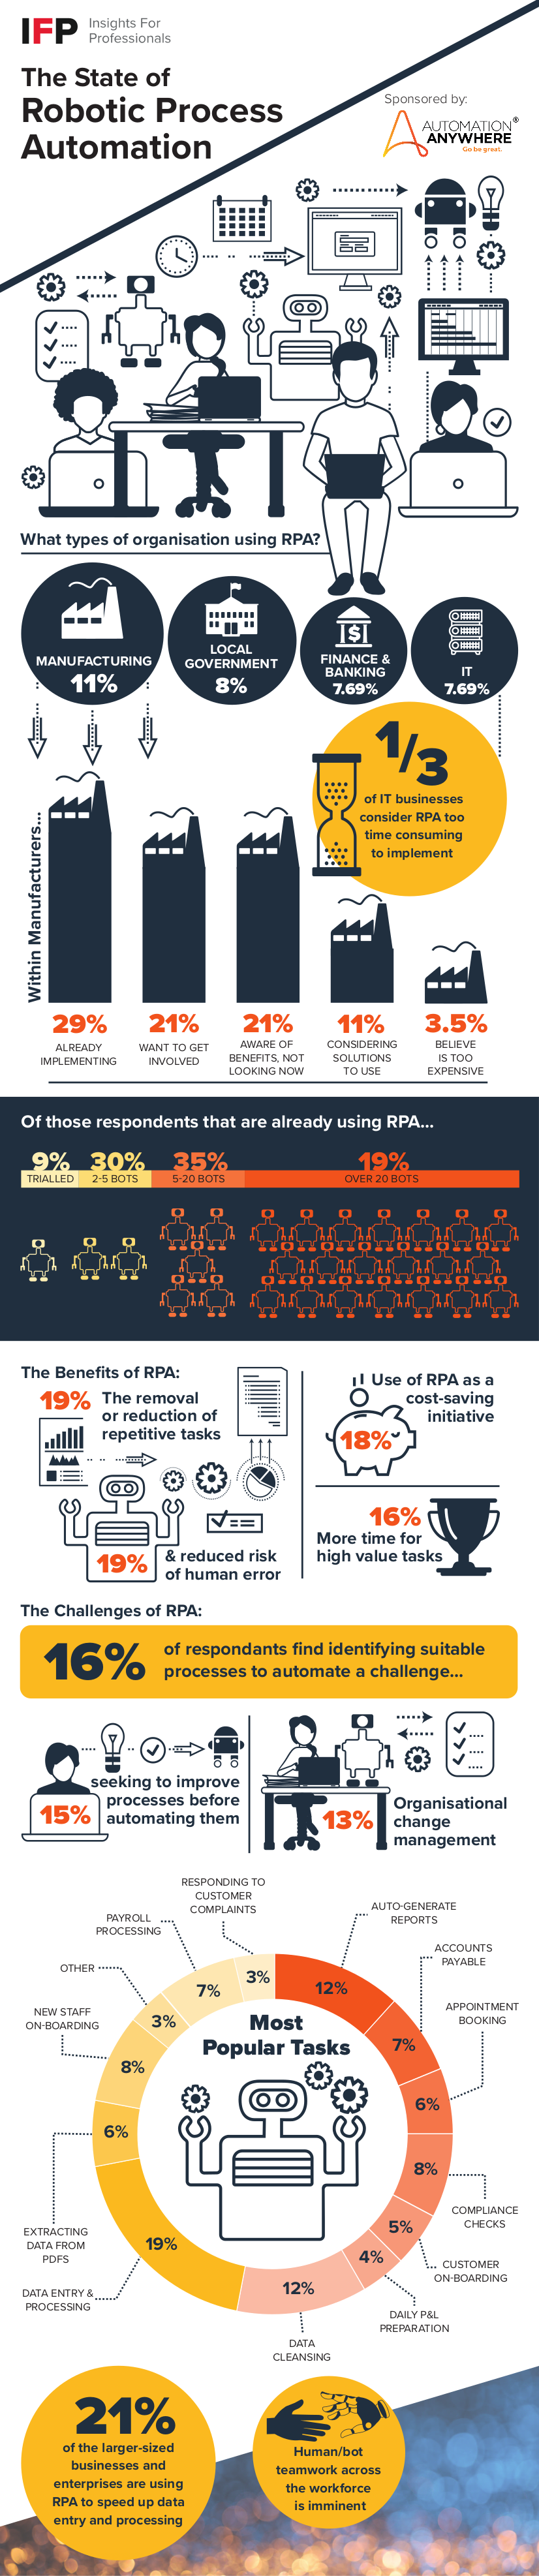 Robotic Process Automation Infographic - IFP